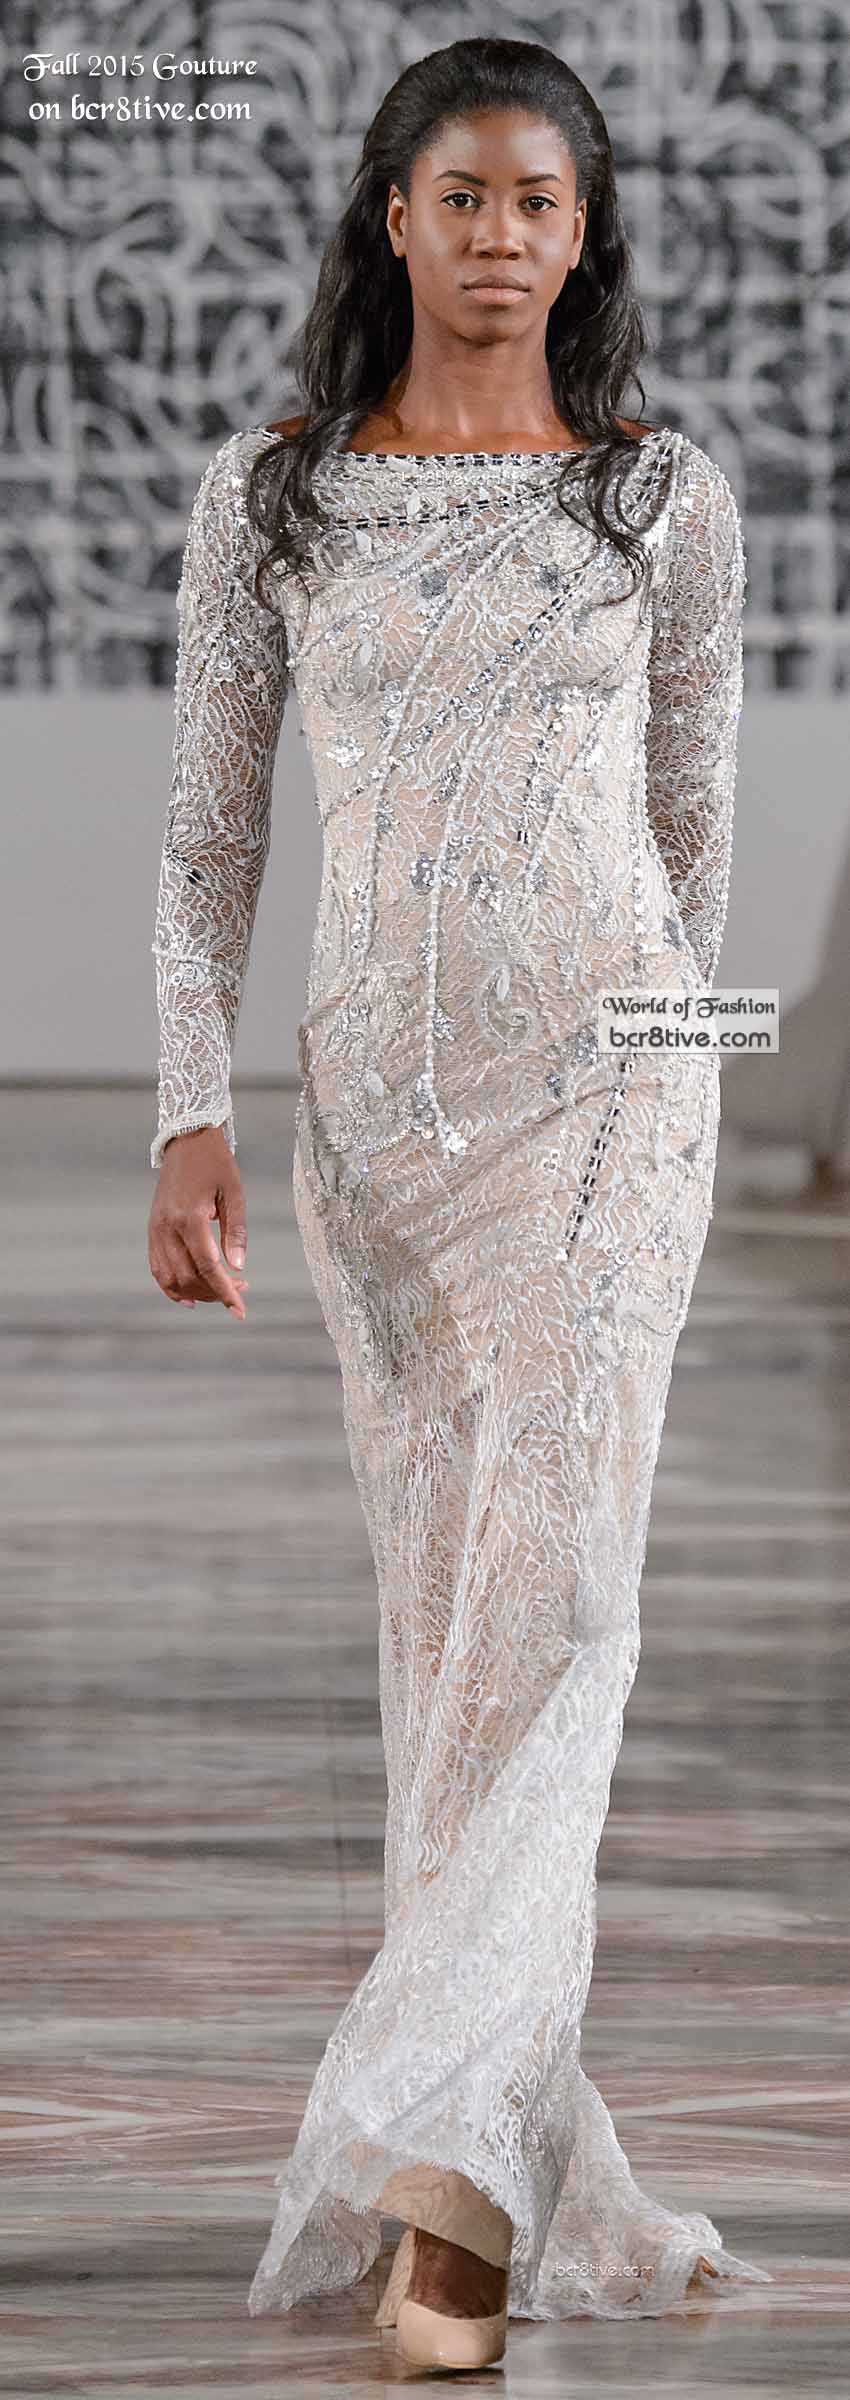 World of Fashion Couture Fall 2015-16